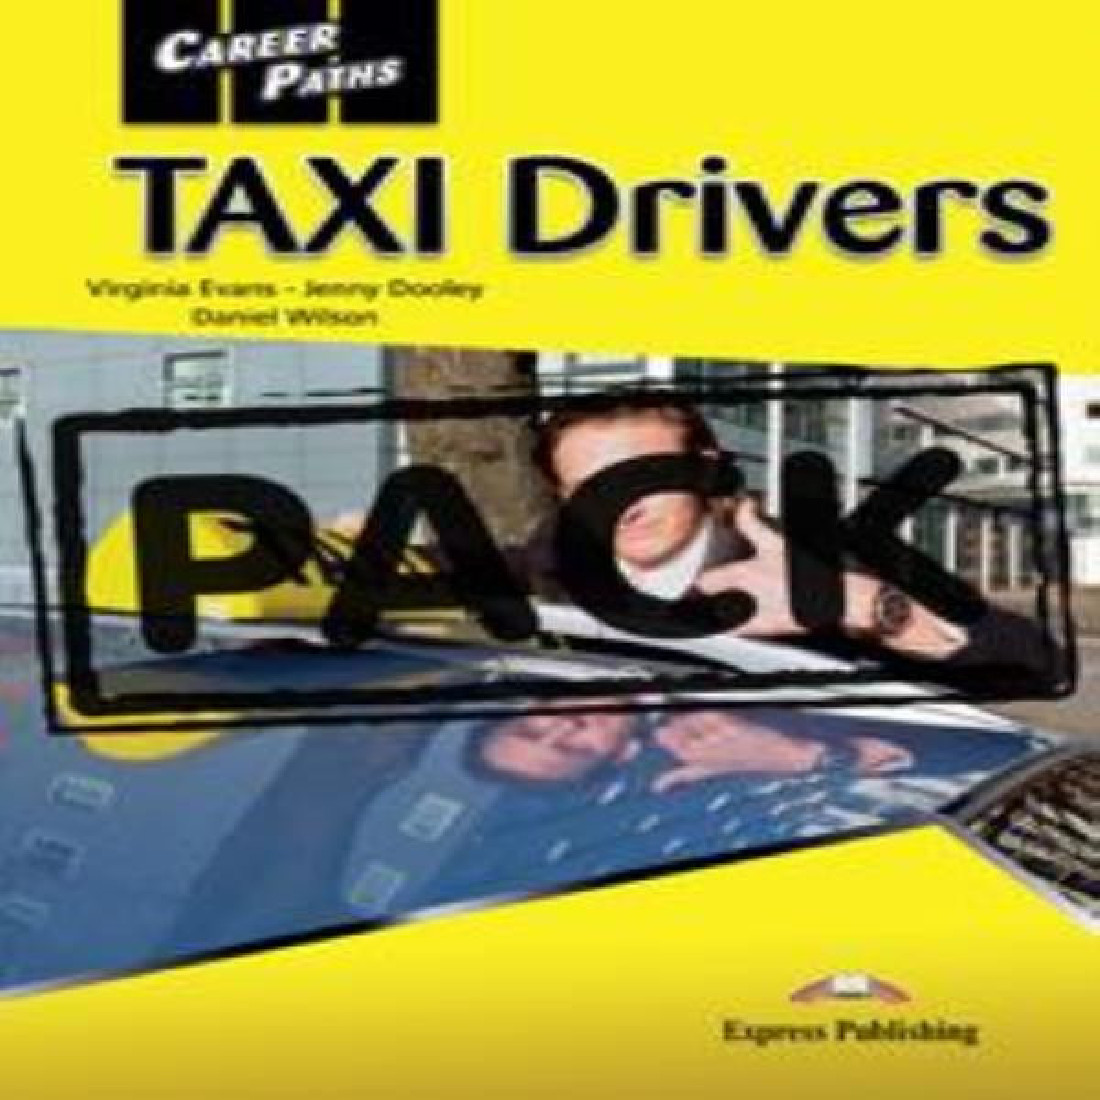 CAREER PATHS TAXI DRIVERS (+CDs) UK VERSION